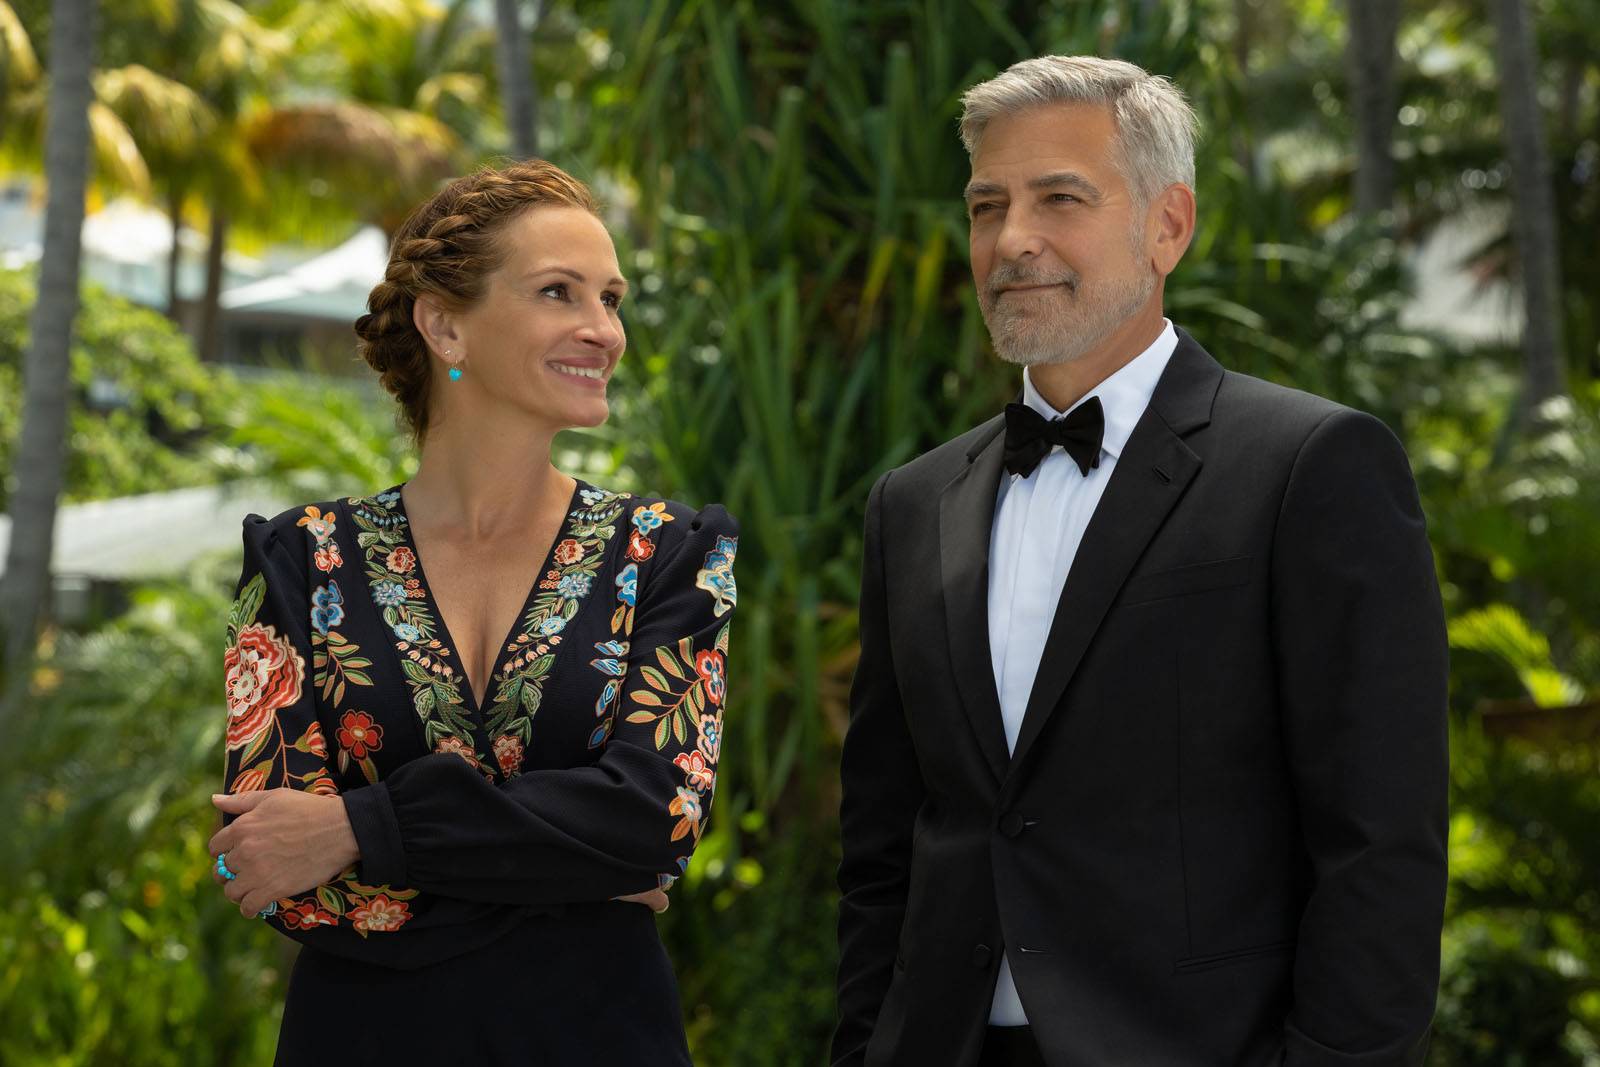 Julia Roberts and George Clooney in "Ticket to Paradise" (2022) by Ol Parker